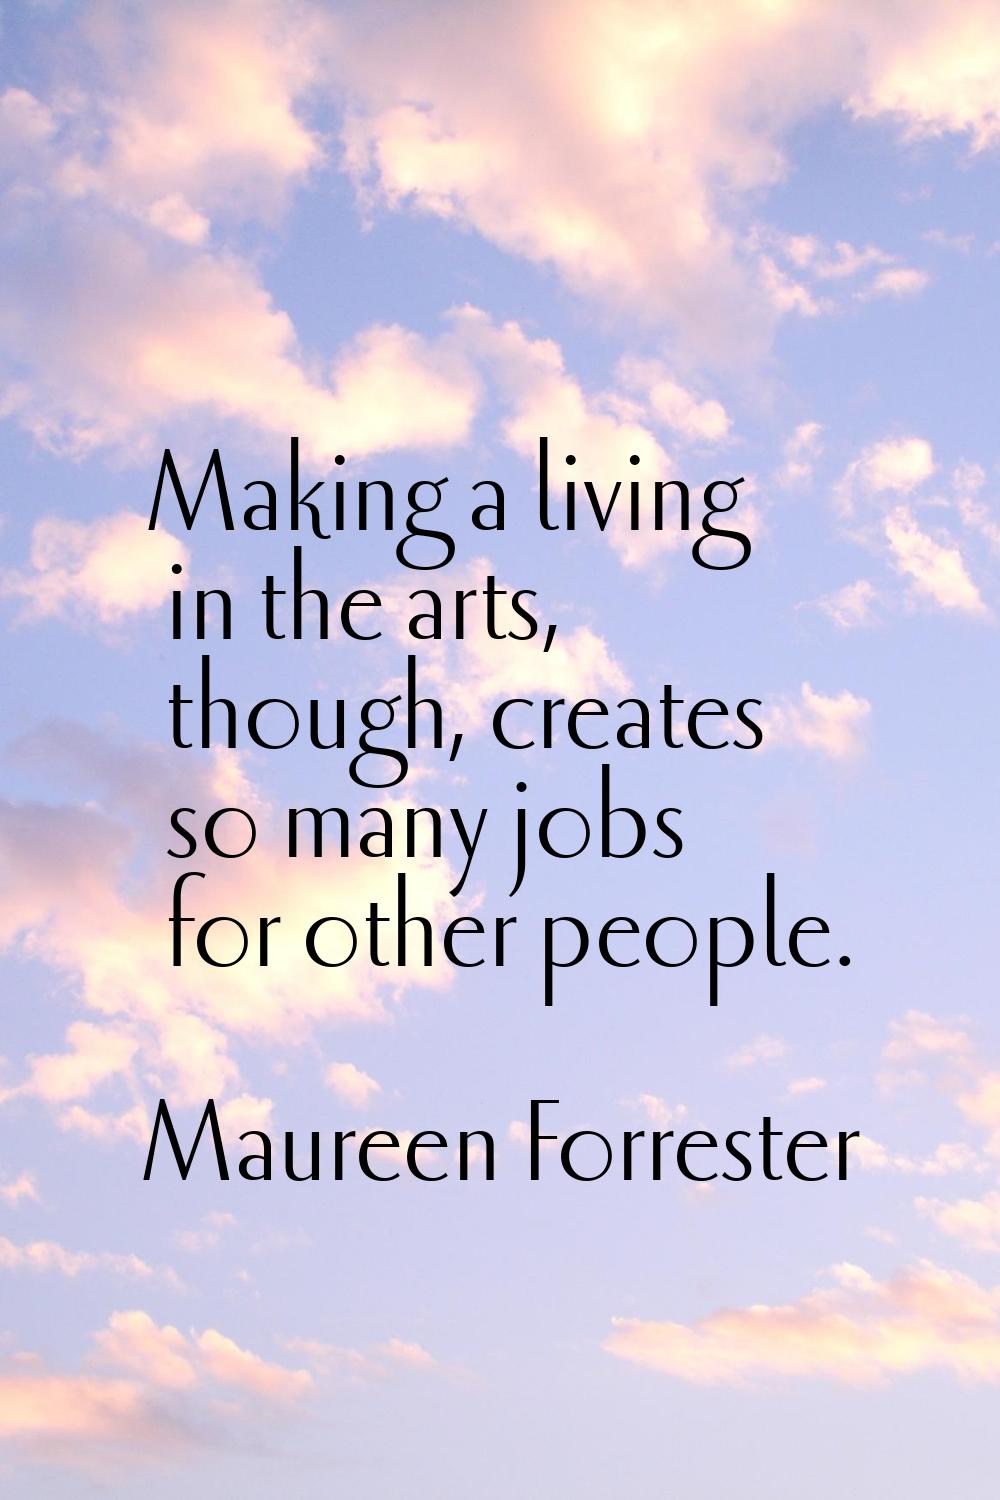 Making a living in the arts, though, creates so many jobs for other people.